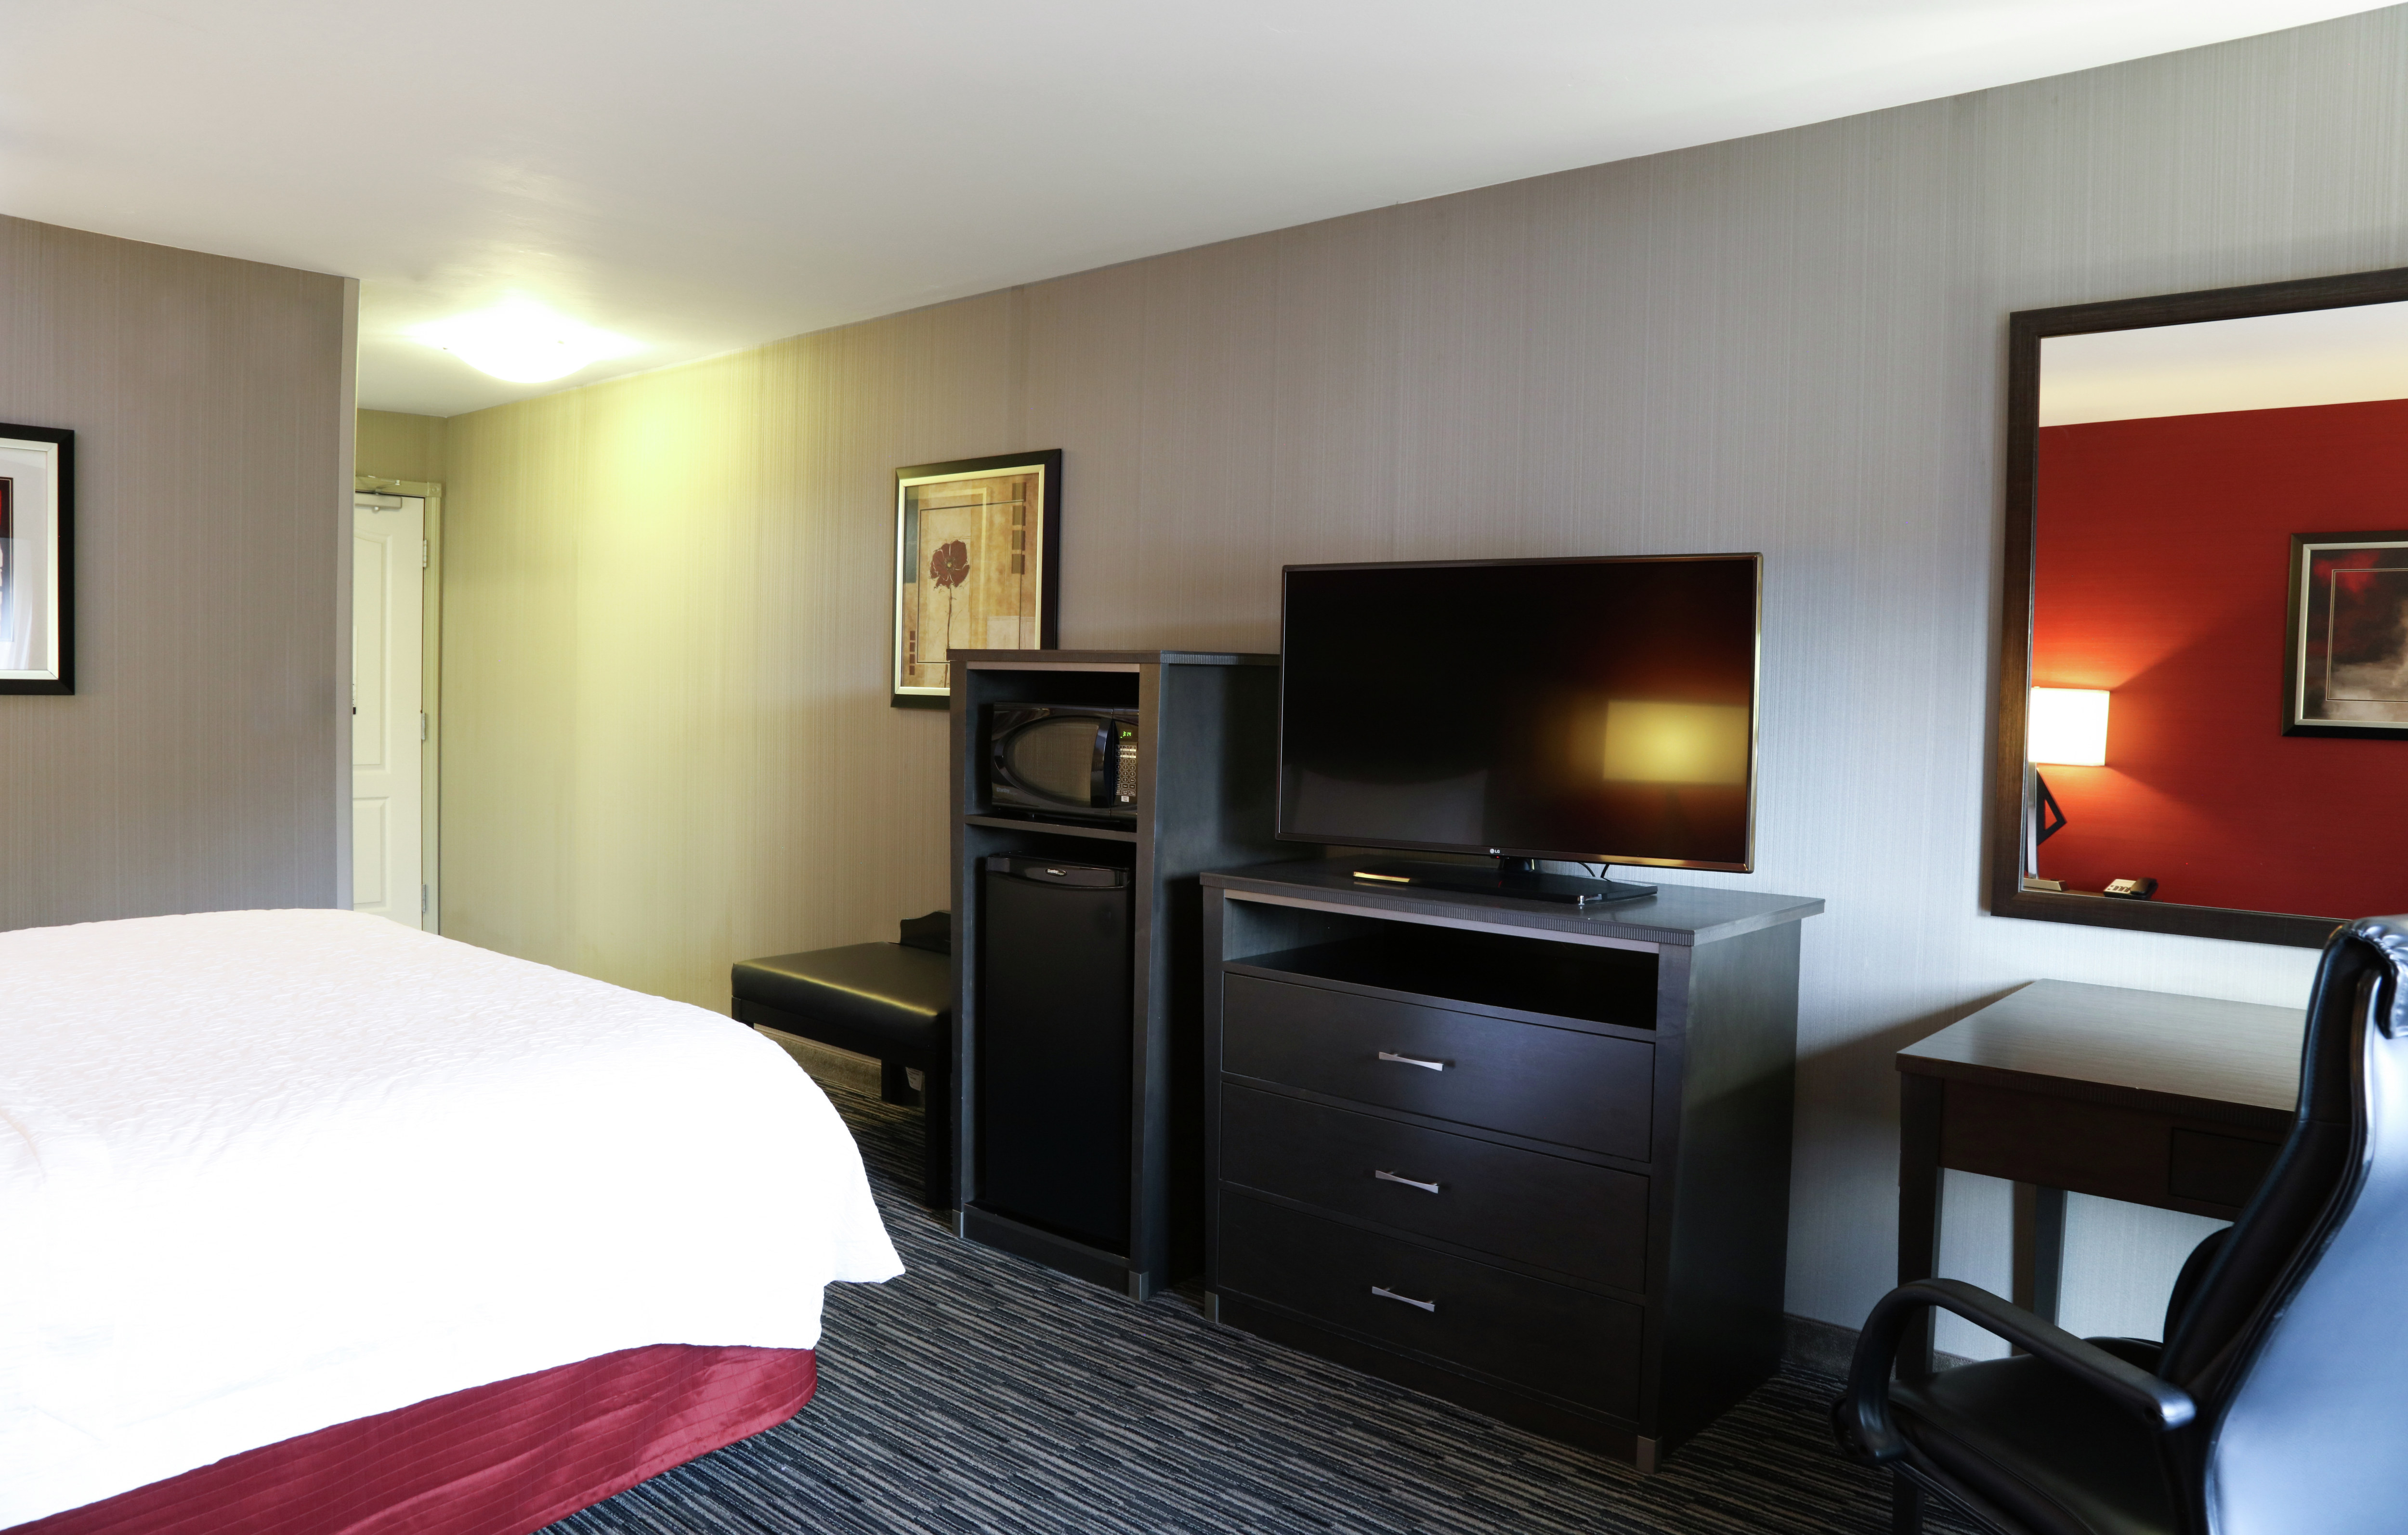 King Guestroom with Bed, Work Desk, and Room Technology